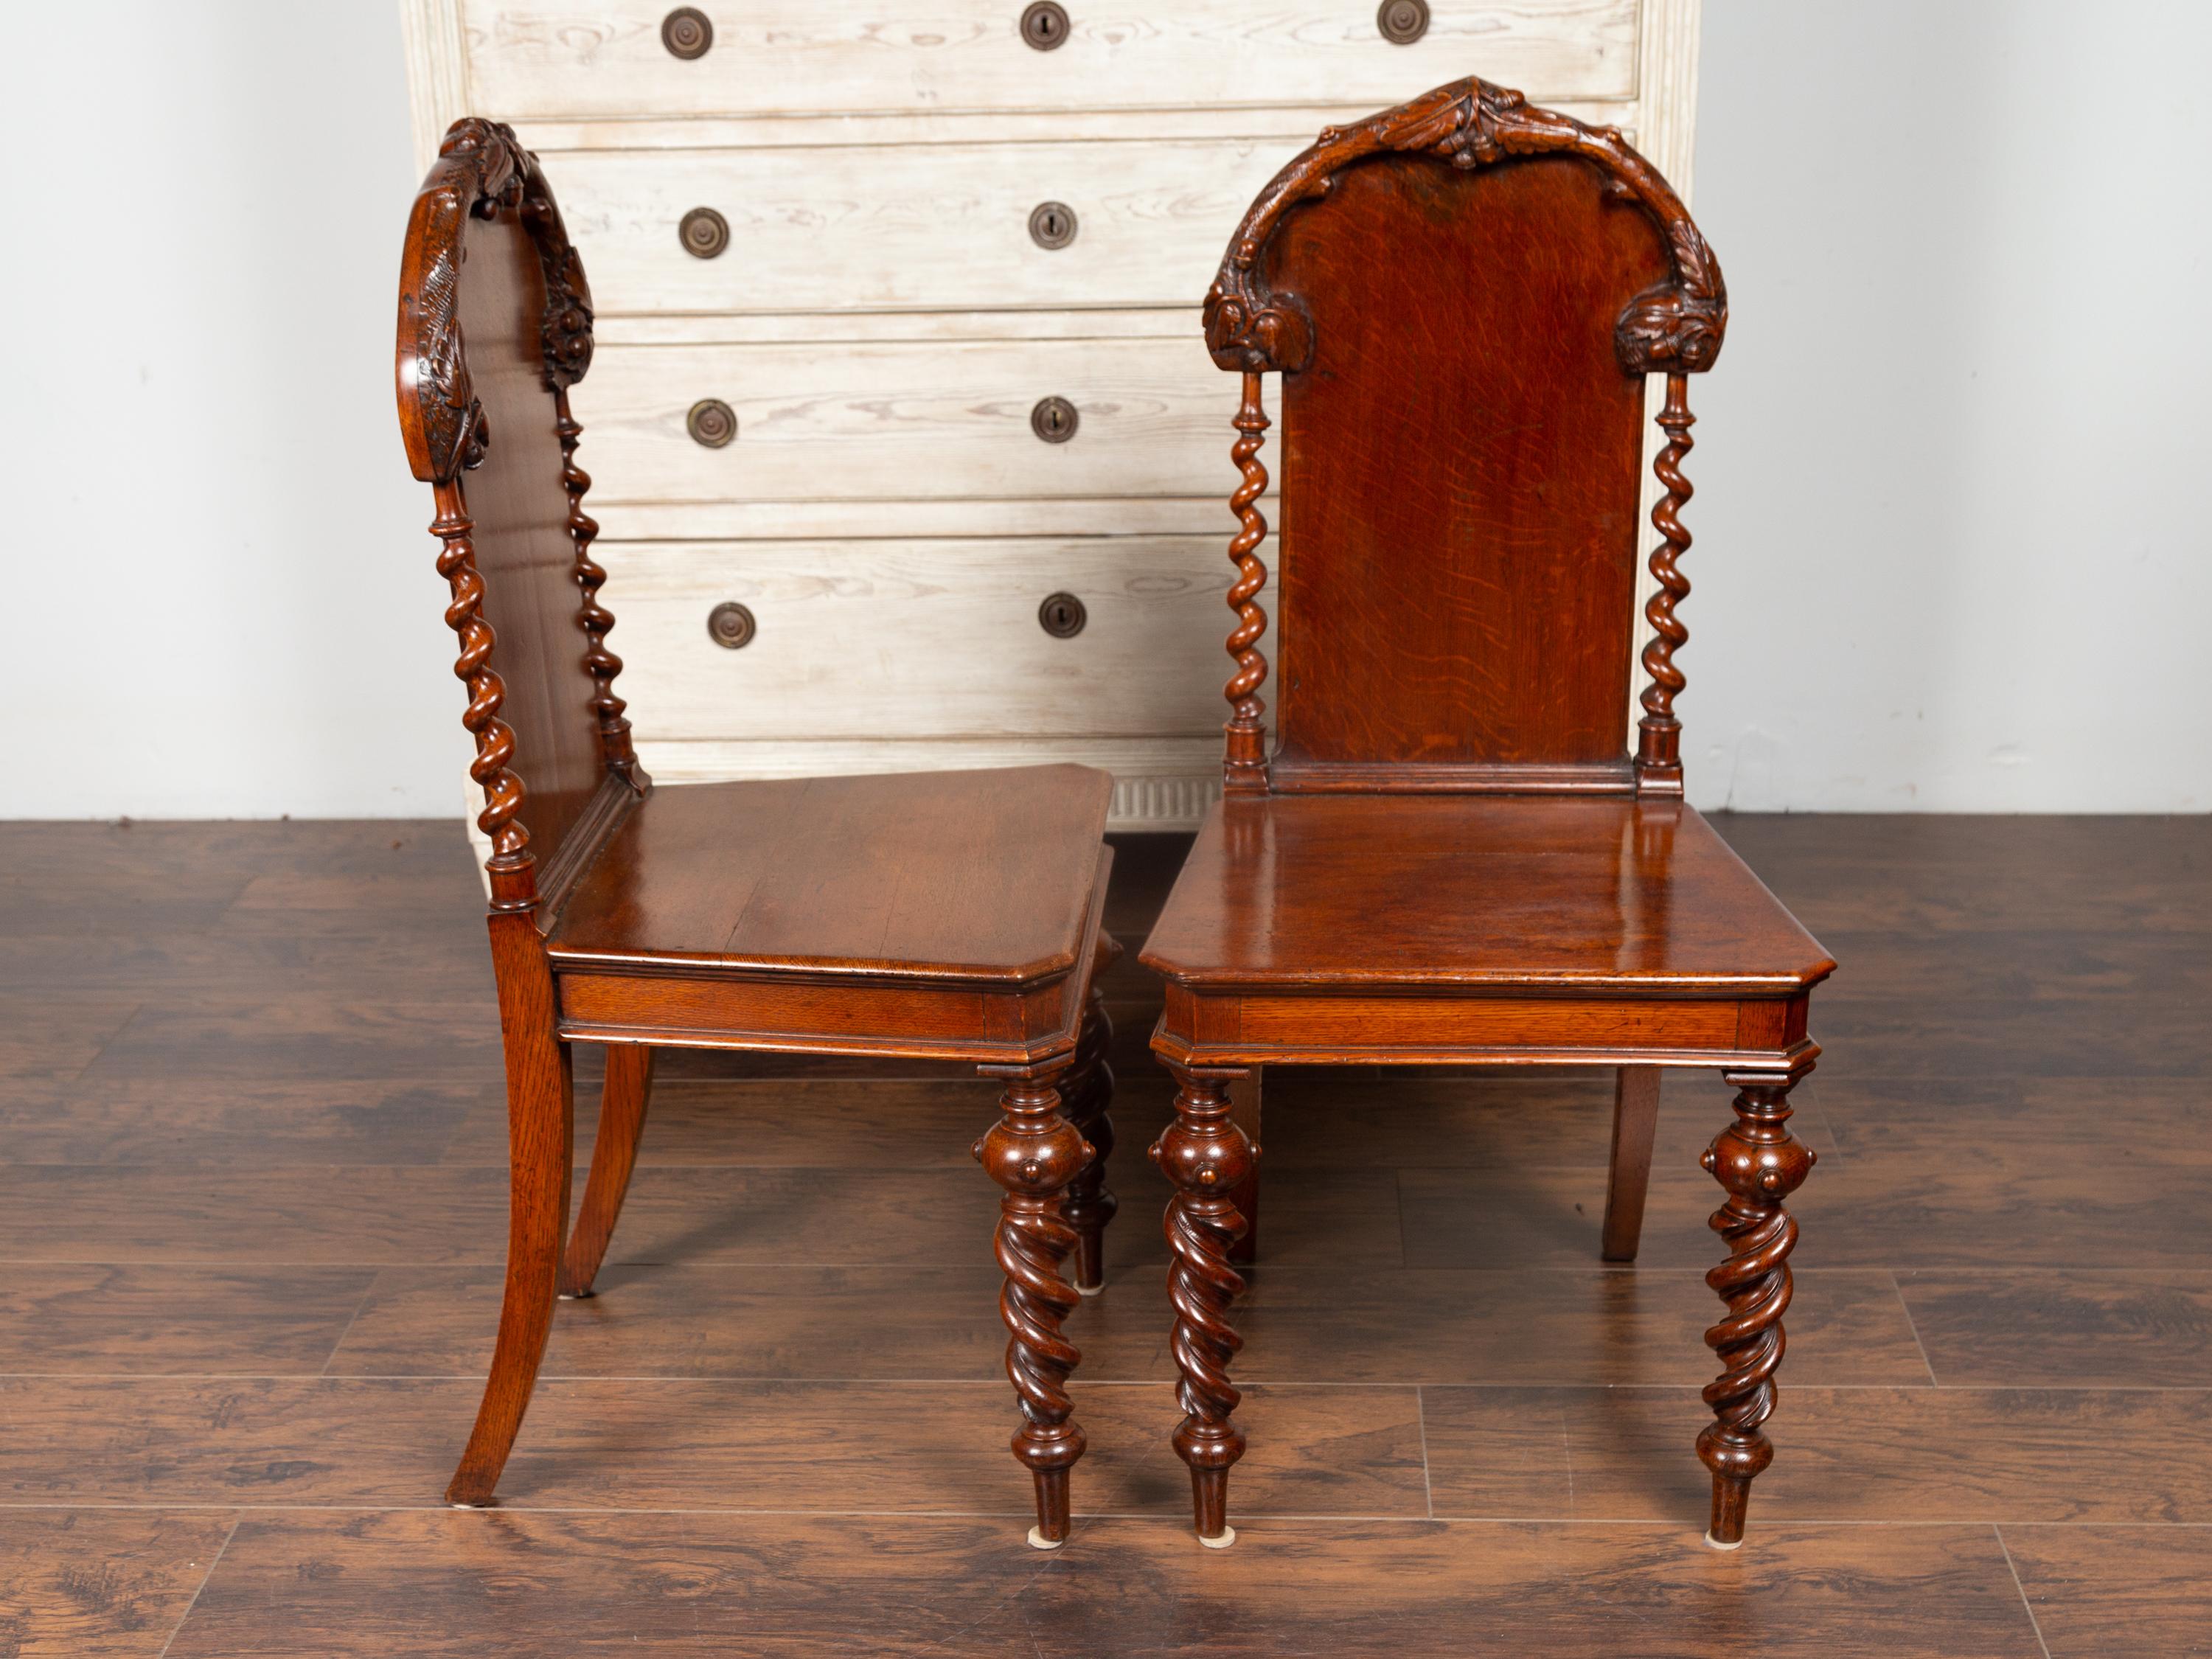 Pair of 1880s English Barley Twist Oak Hall Chairs with Foliage and Acorn Motifs 4